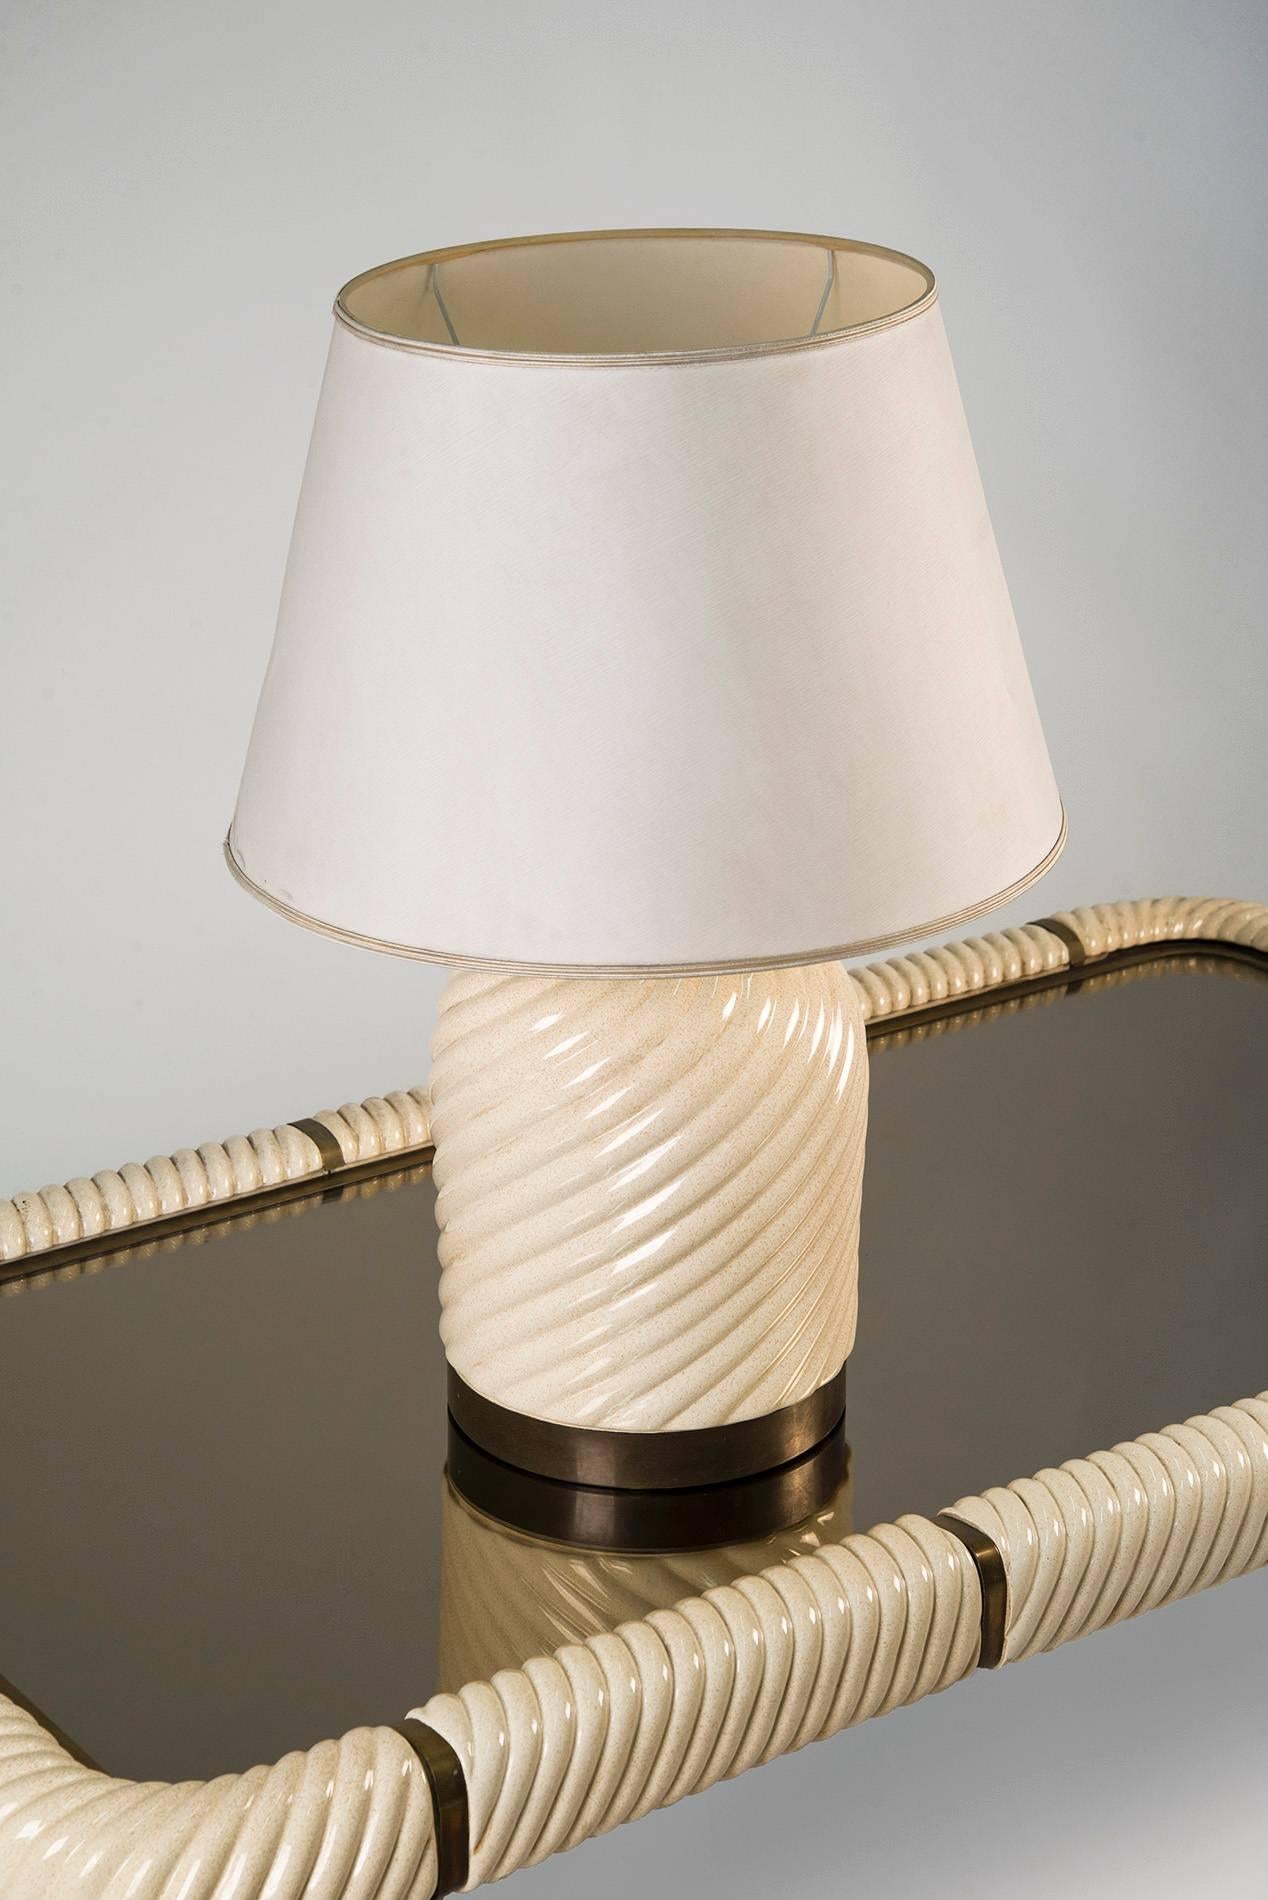 Table lamp designed by Tommaso Barbi, Italy, 1970. Spiral ceramic structure with brass base, fabric shade. The internal part is marked and labeled. Very good original conditions.